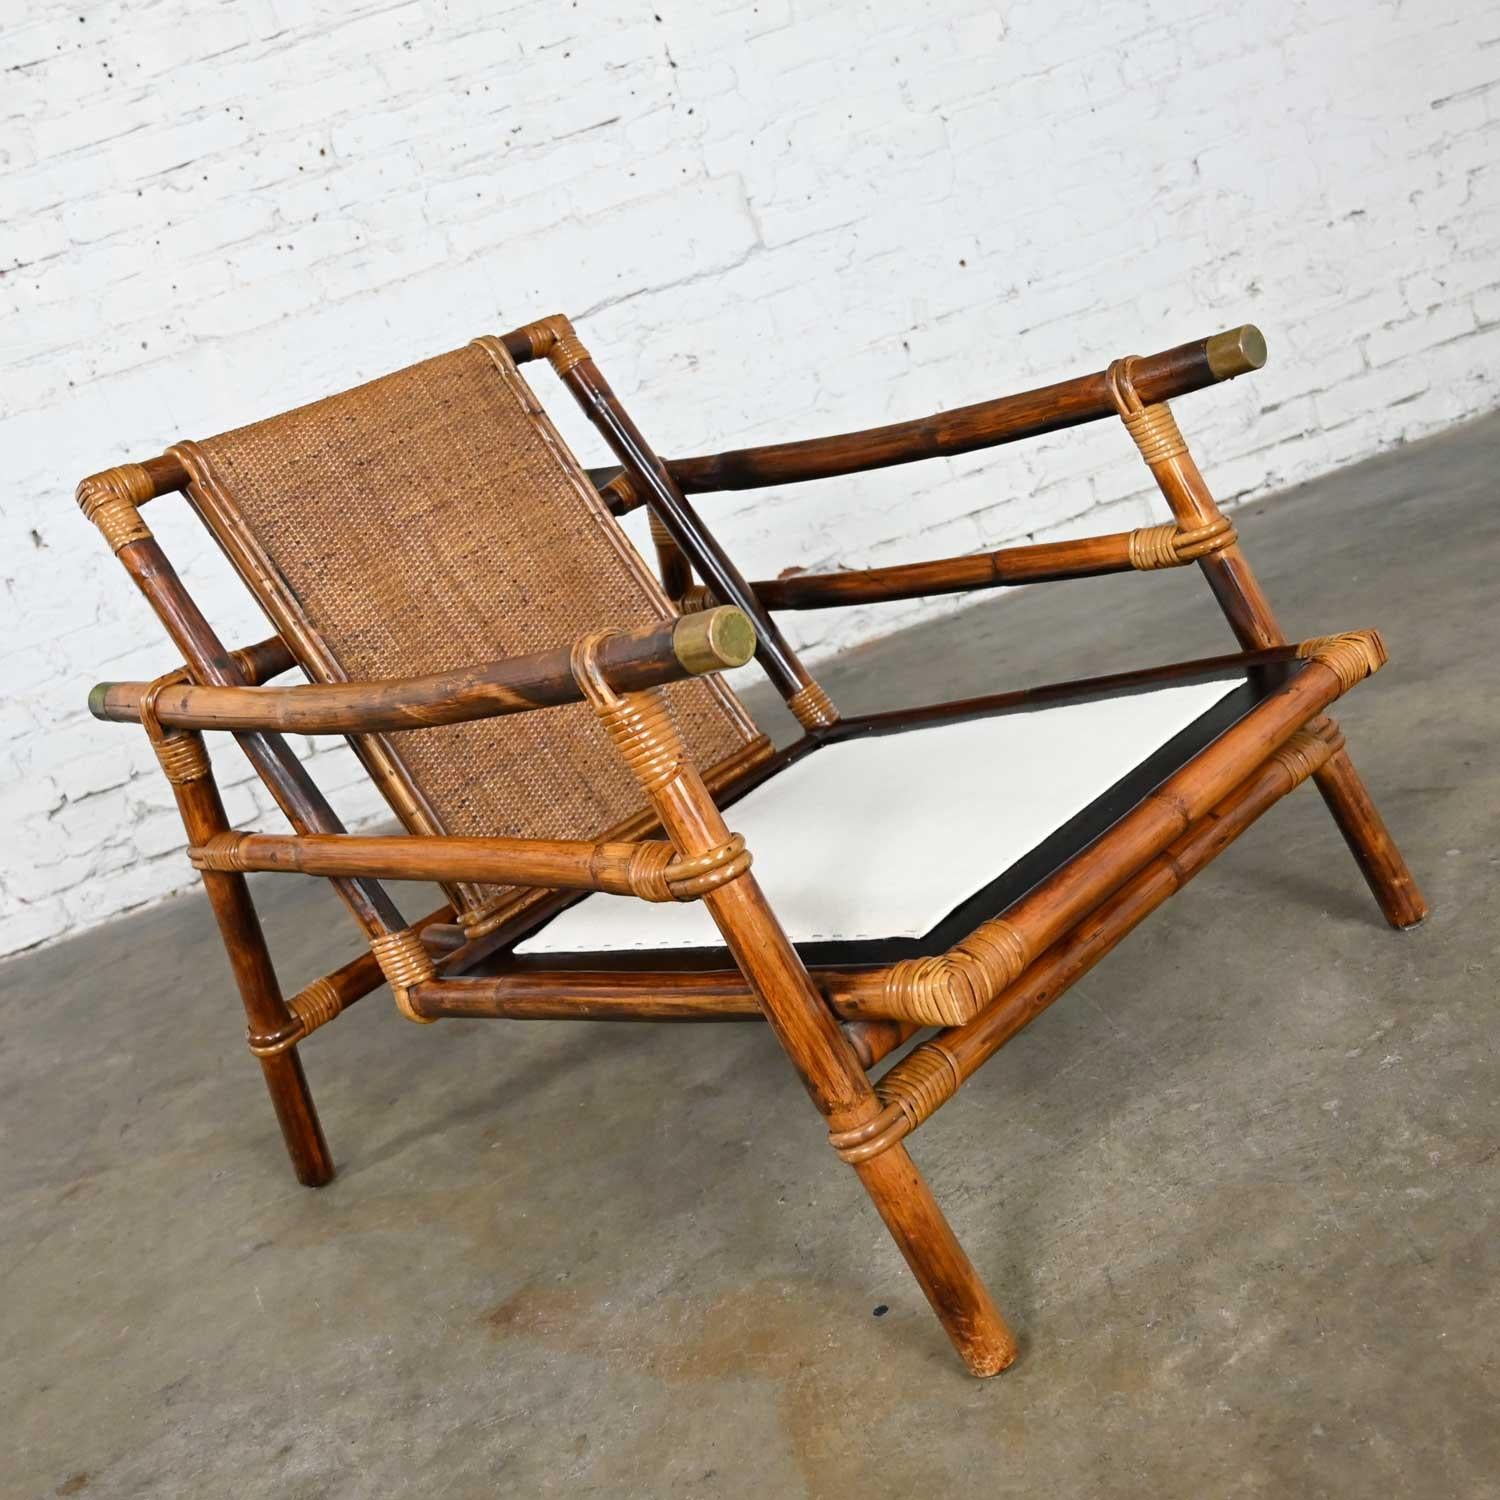 Wonderful vintage rattan Campaign Style Ficks Reed Far Horizons Collection lounge or club chair designed by John Wisner. Beautiful condition, keeping in mind that this is vintage and not new so will have signs of use and wear. It has been